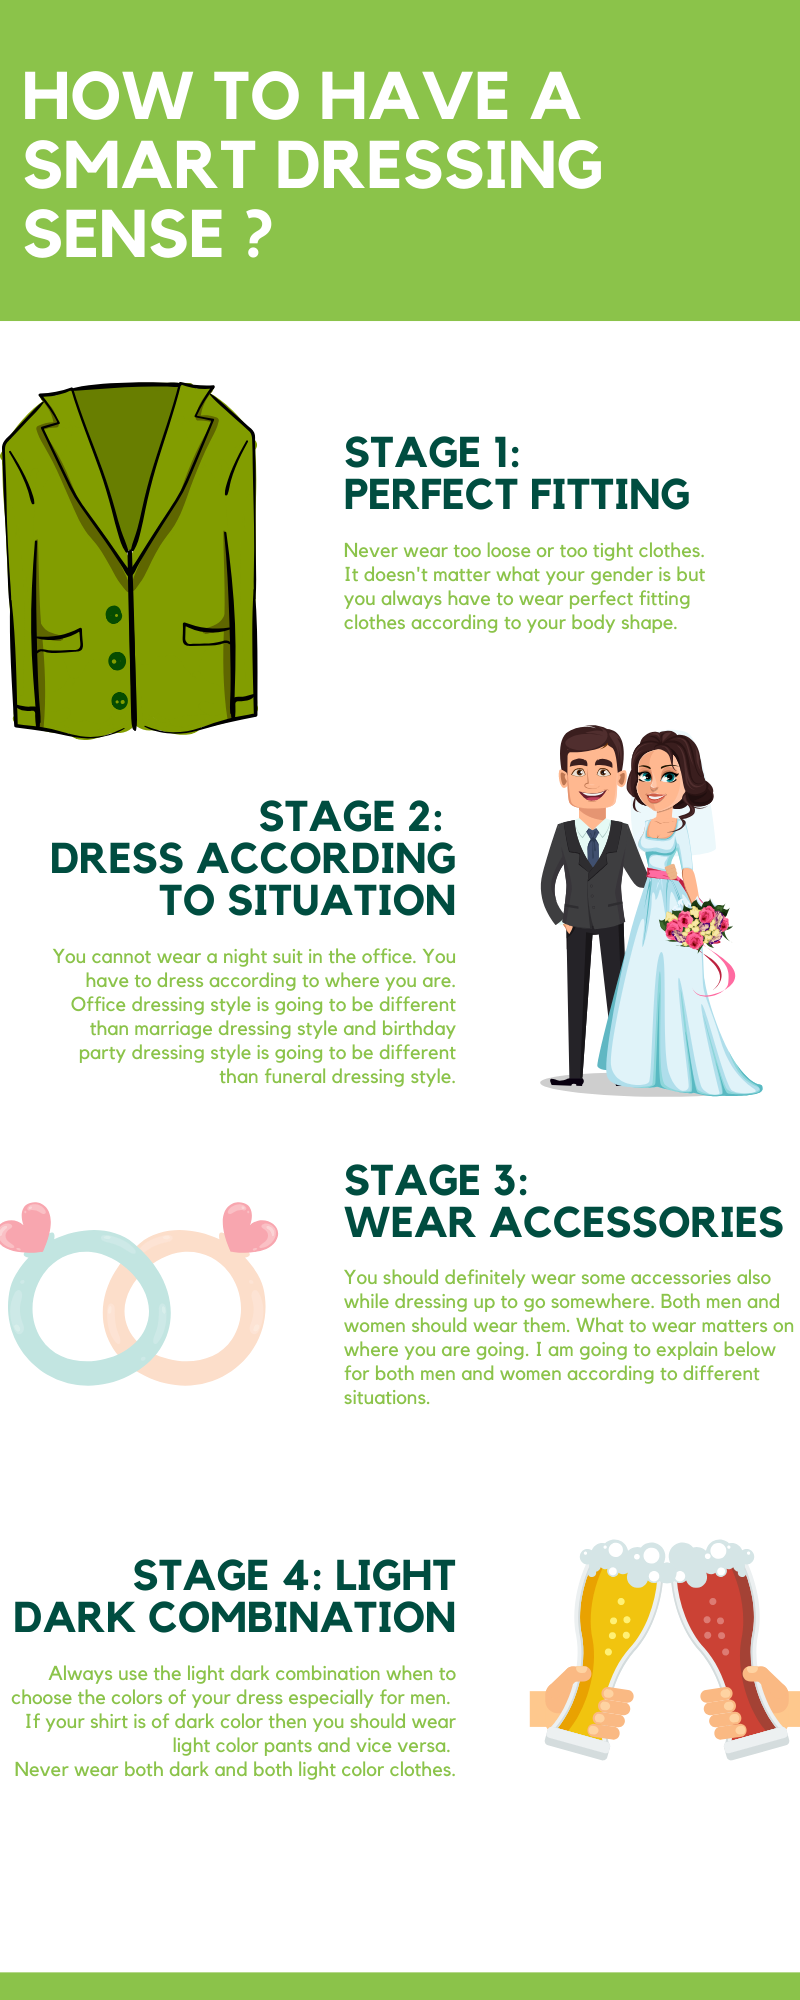 how to have a smart dressing sense